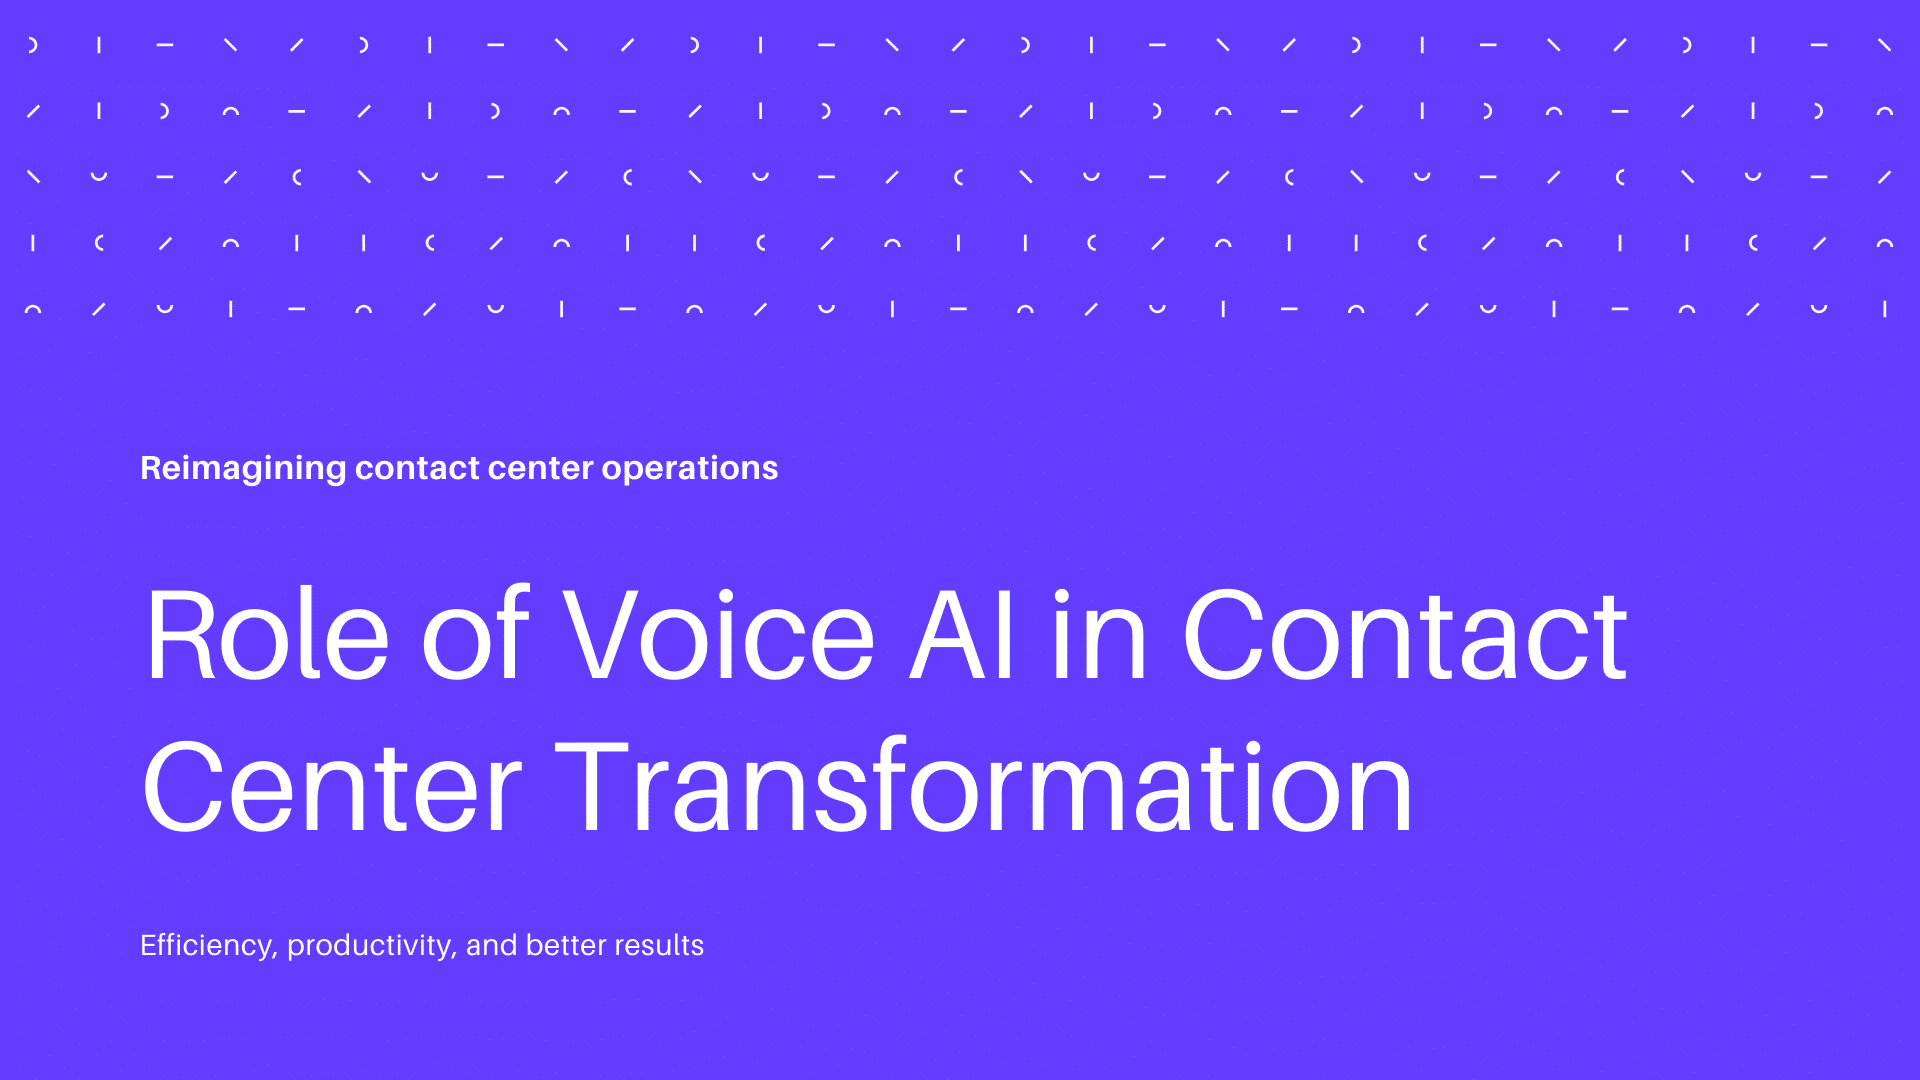 Role of Voice AI in Contact Center Transformation